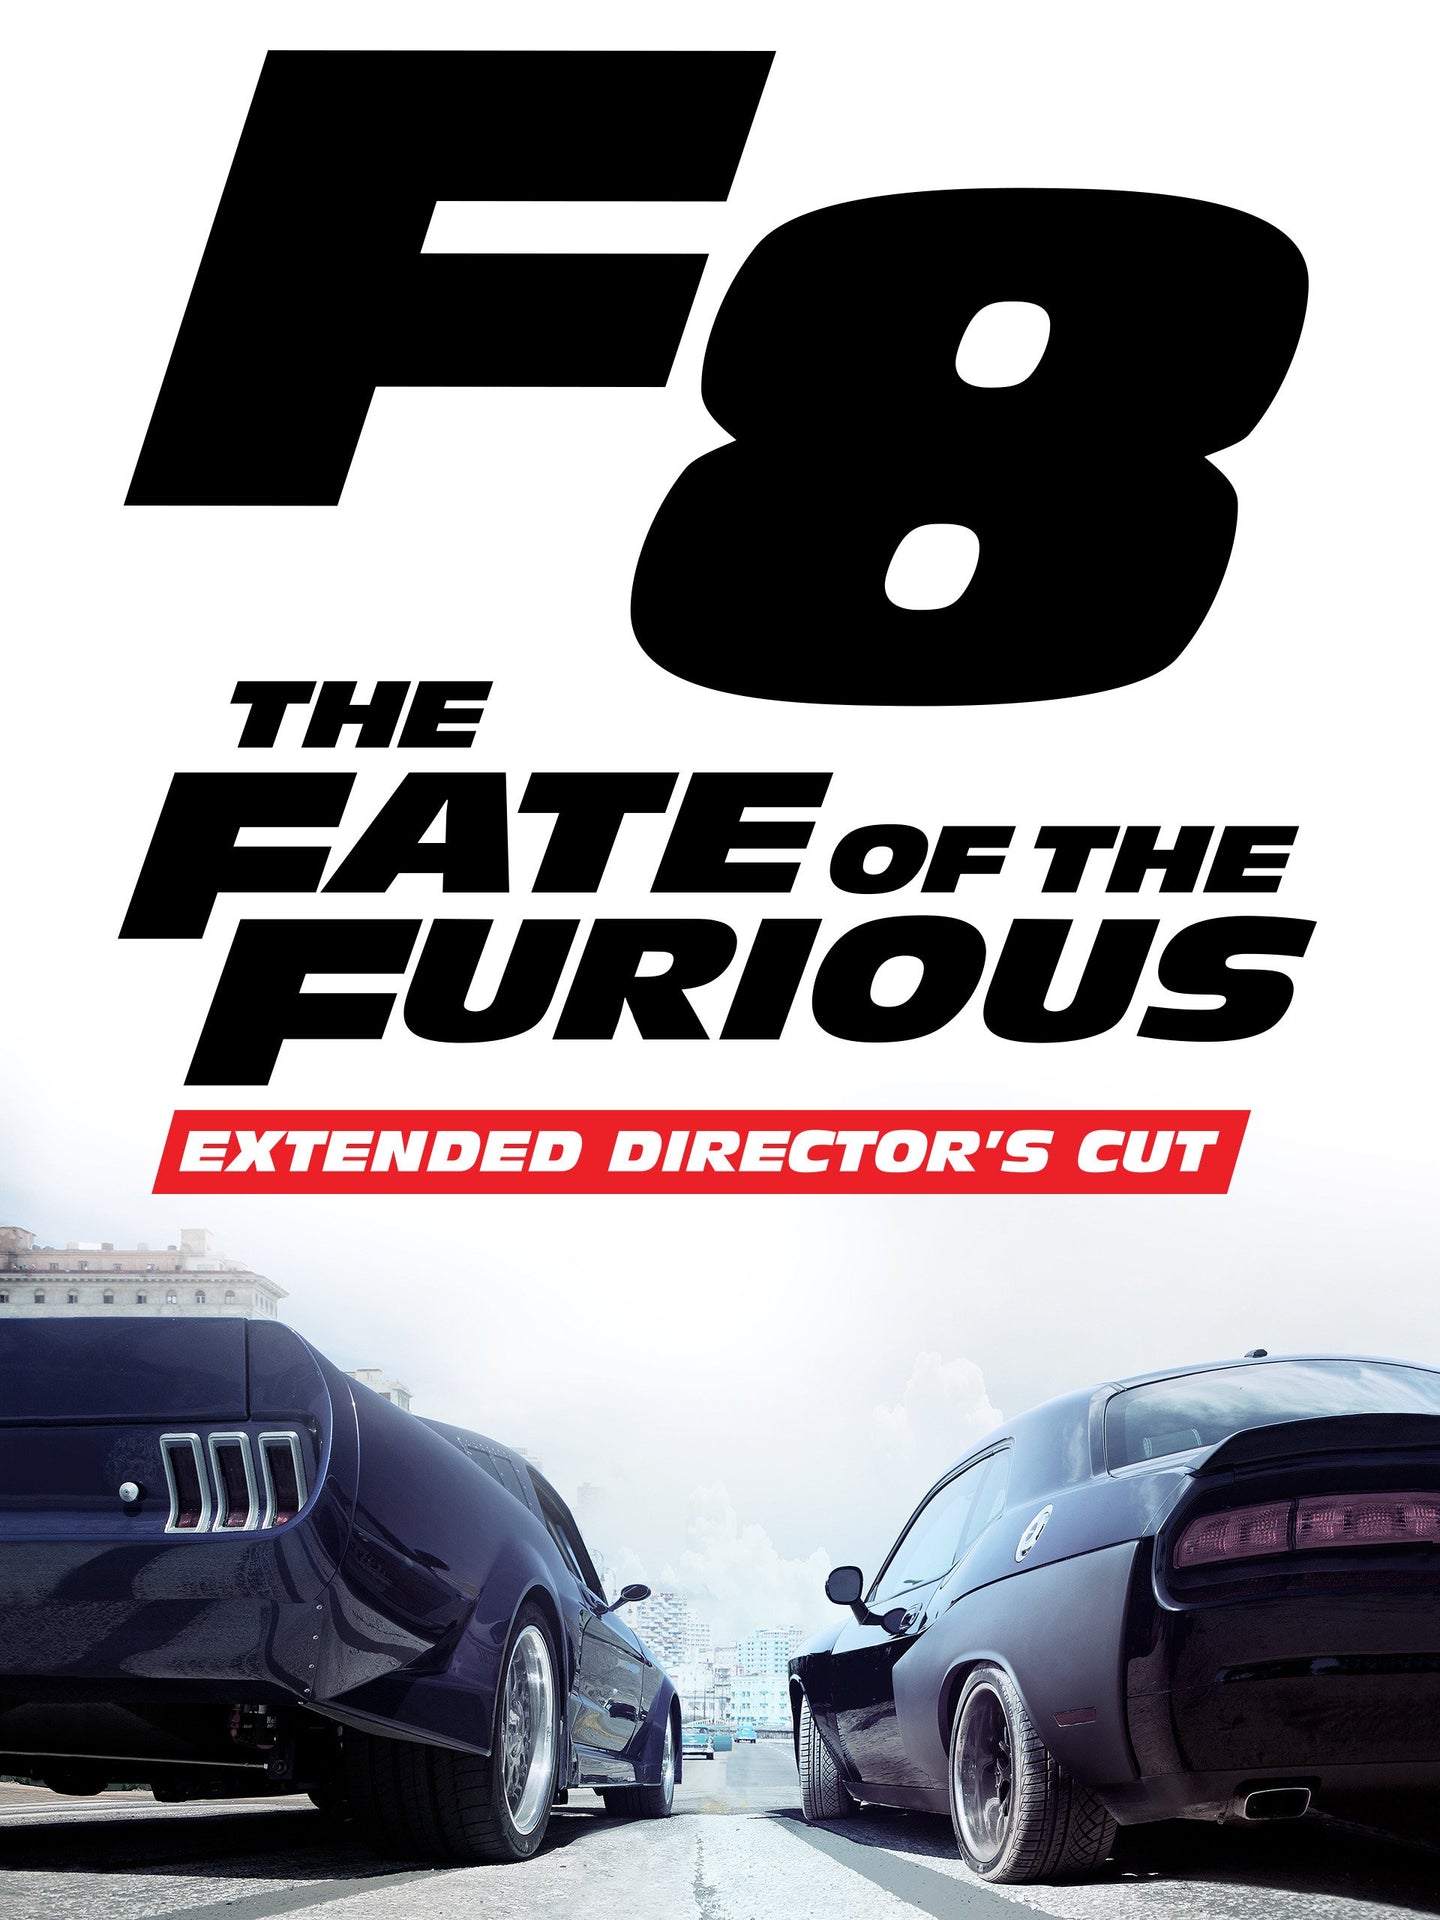 The Fate of the Furious (2017) [Extended Director's Cut] Vudu or Movies Anywhere HD code